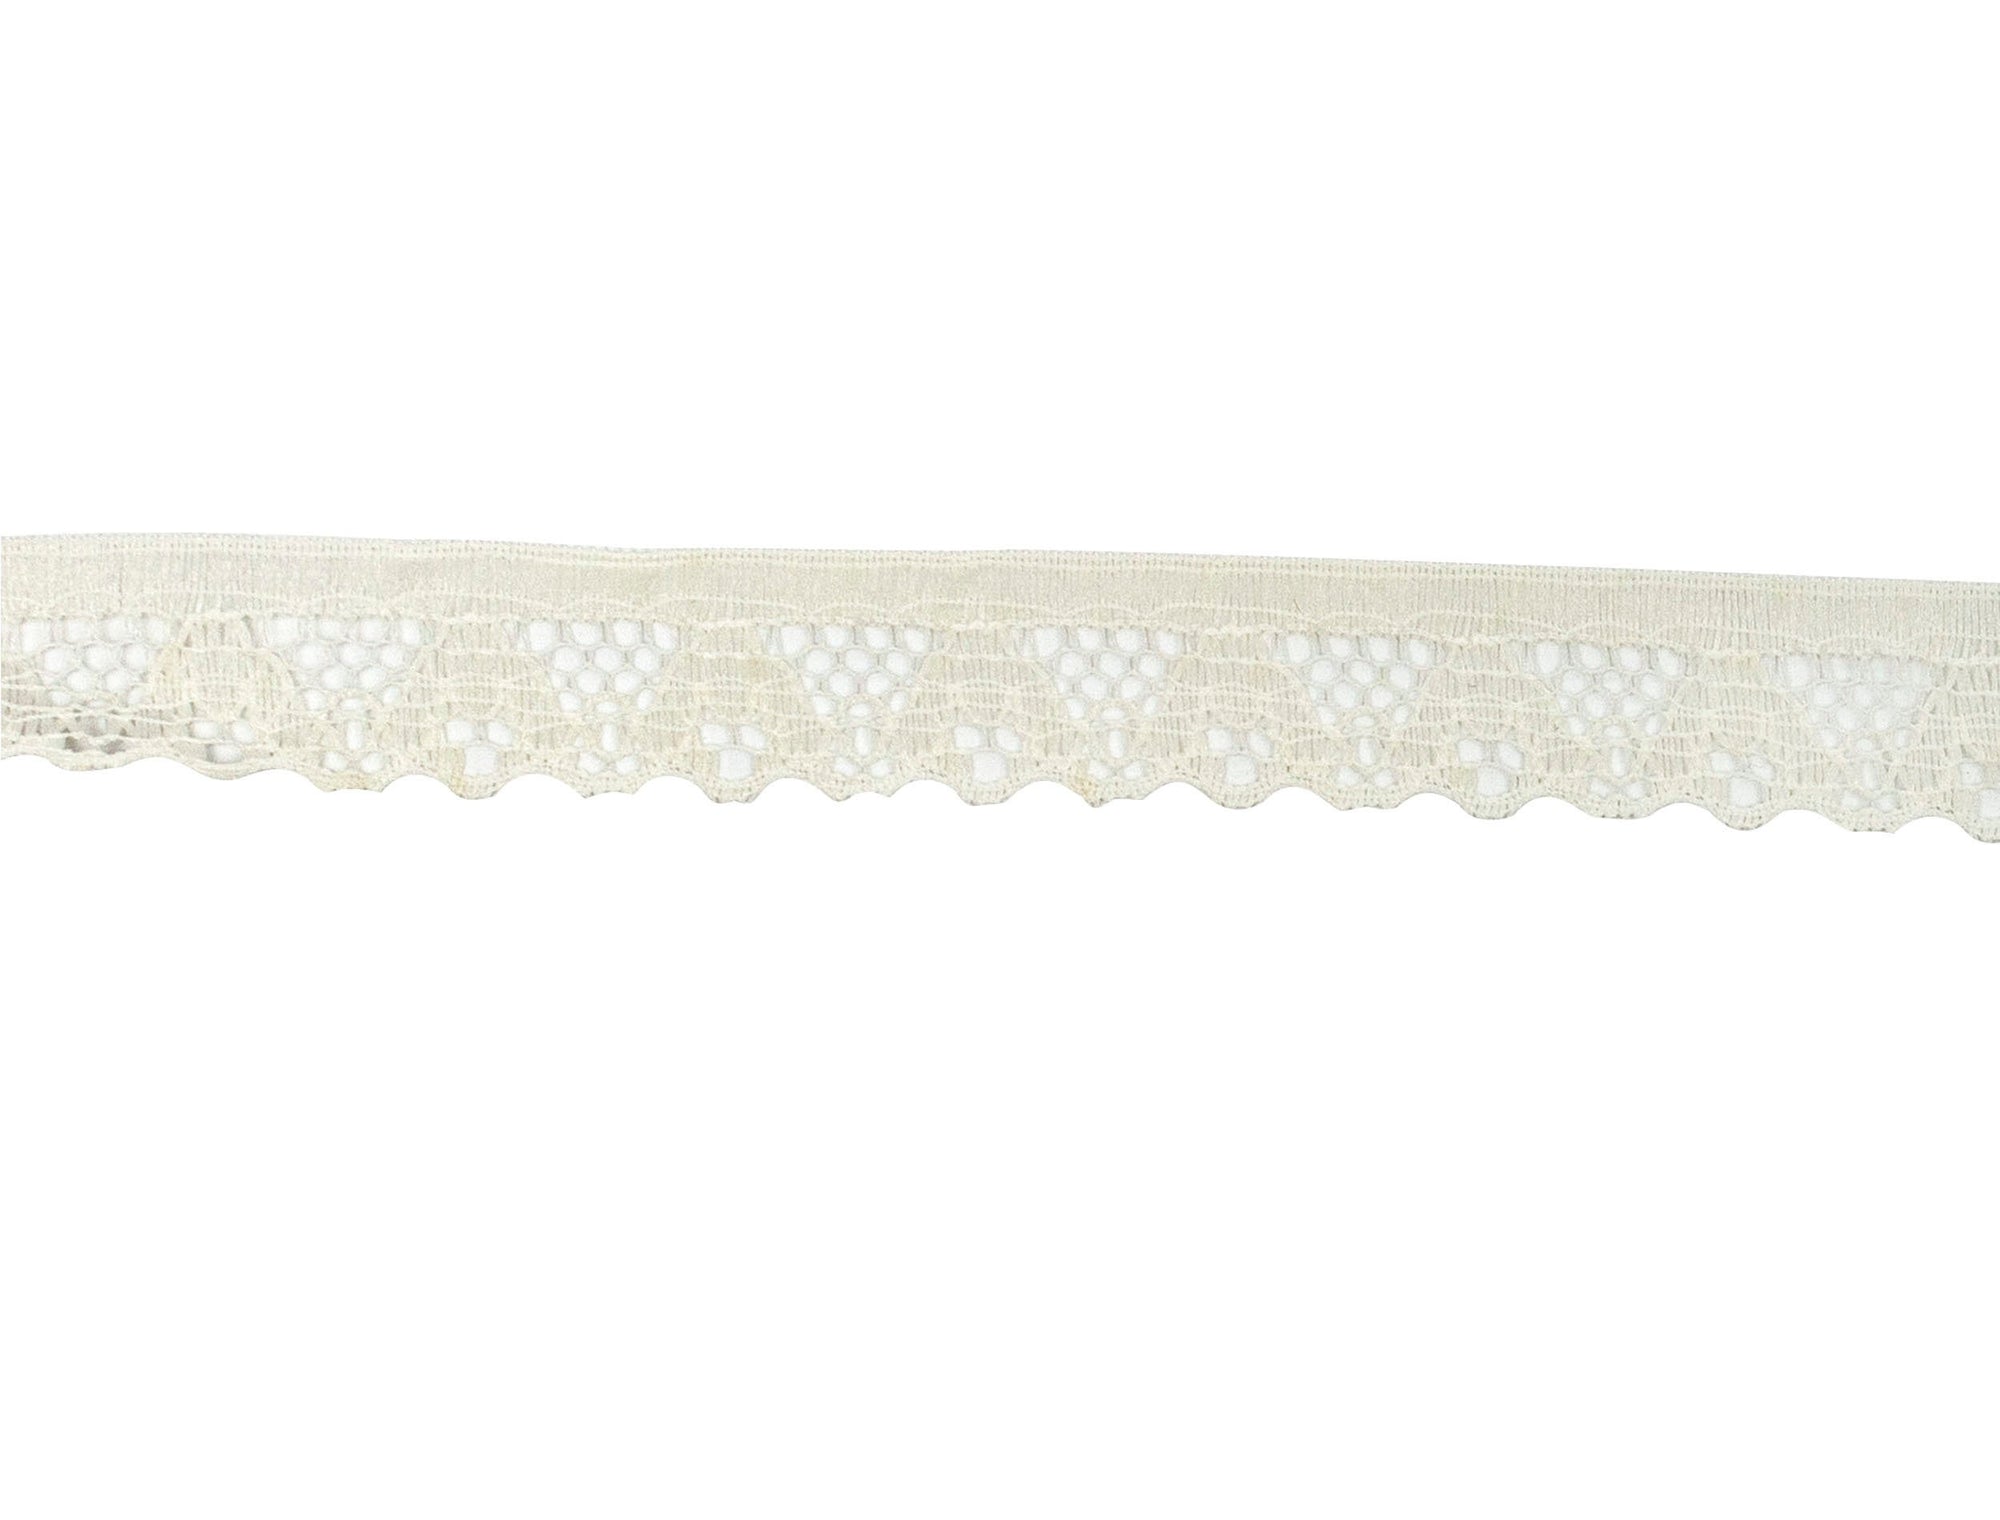 Dotted White Lace Trim 2 1/2 Wide